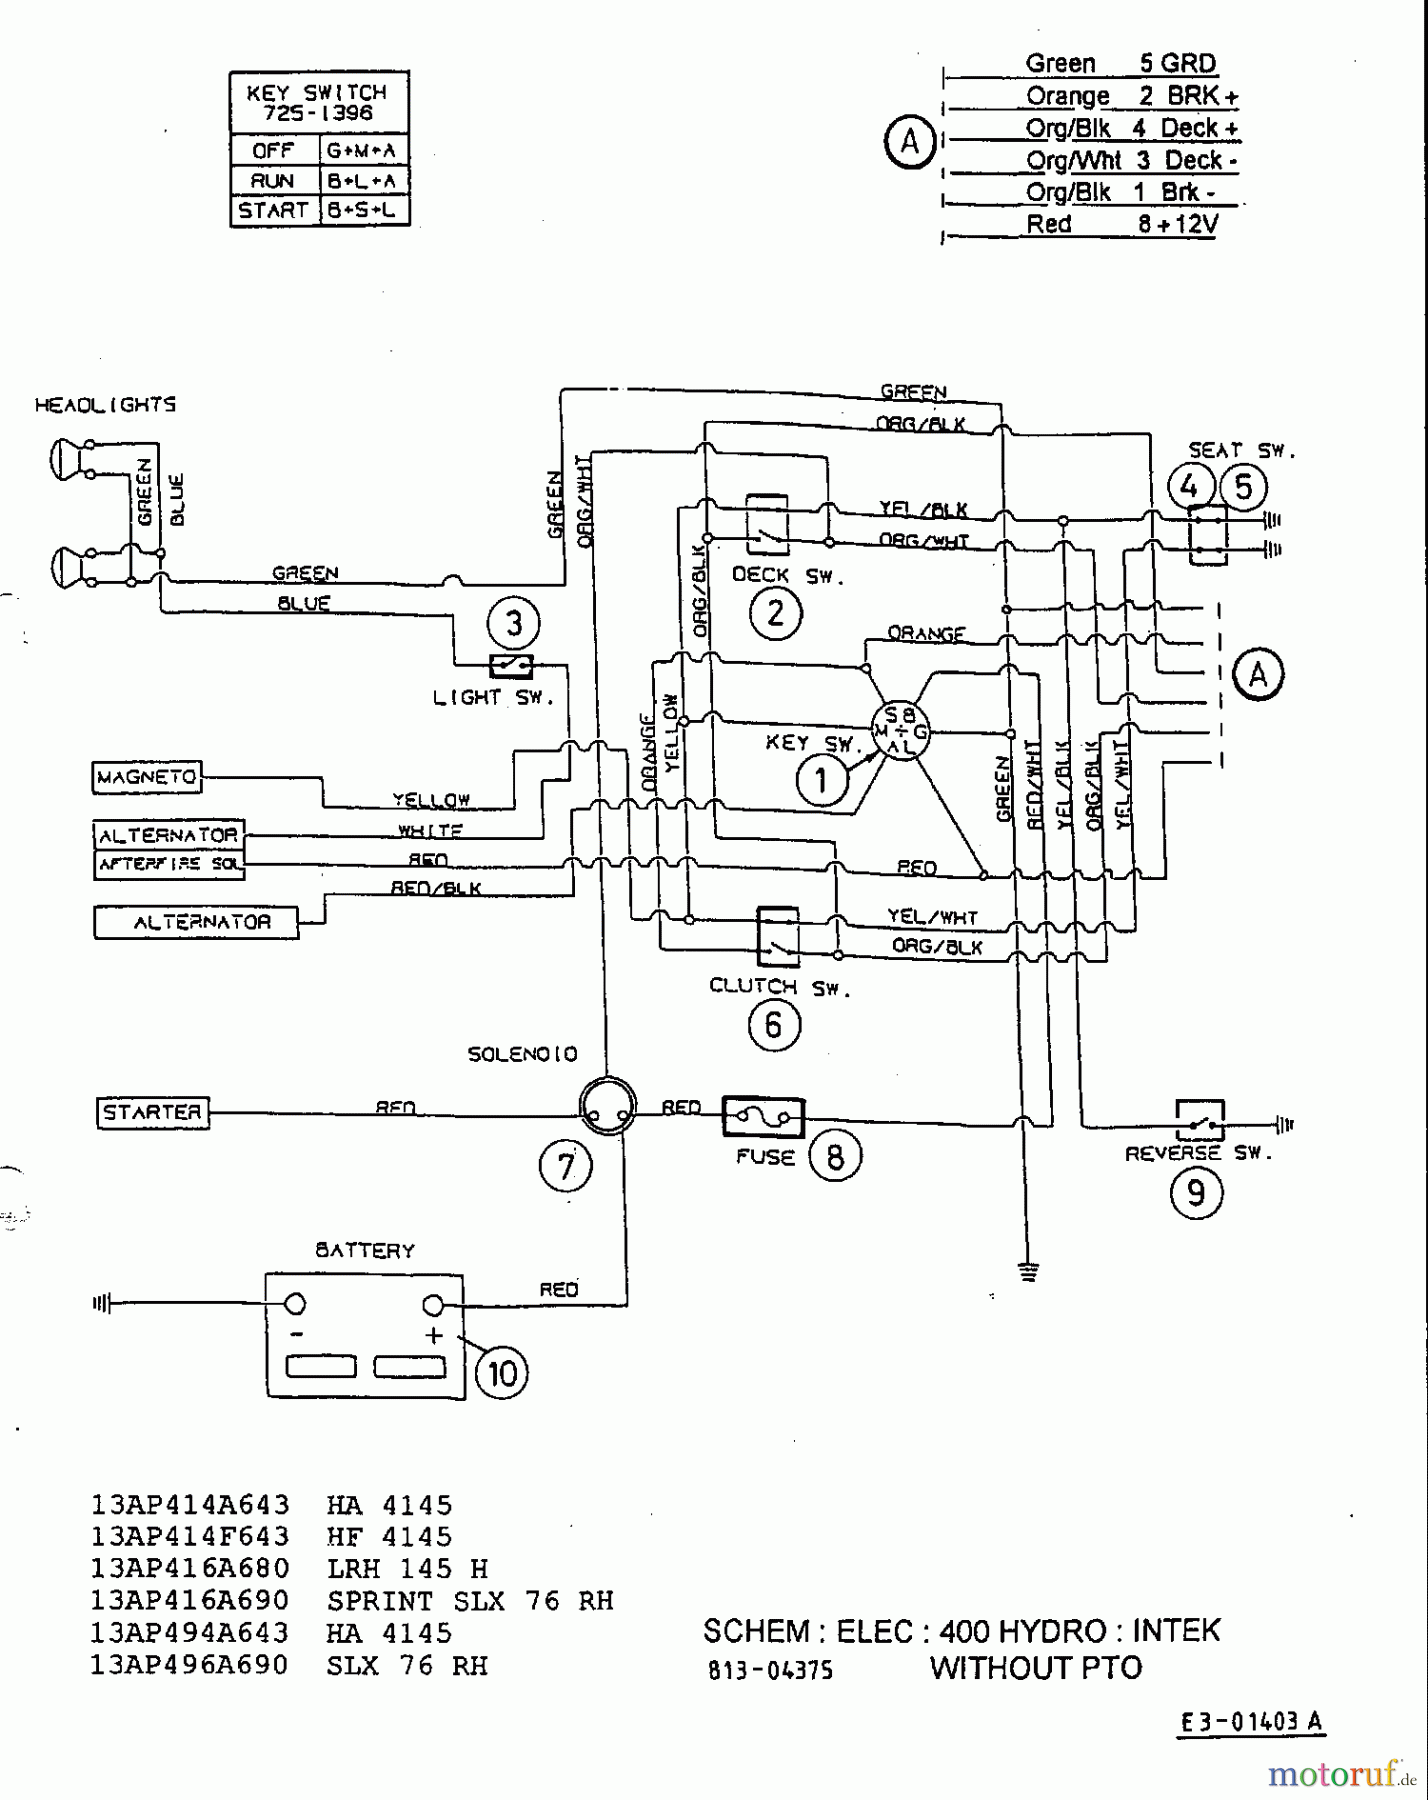  Yard-Man Lawn tractors HE 4160 13AD494E643  (1999) Wiring diagram Intek without electric clutch